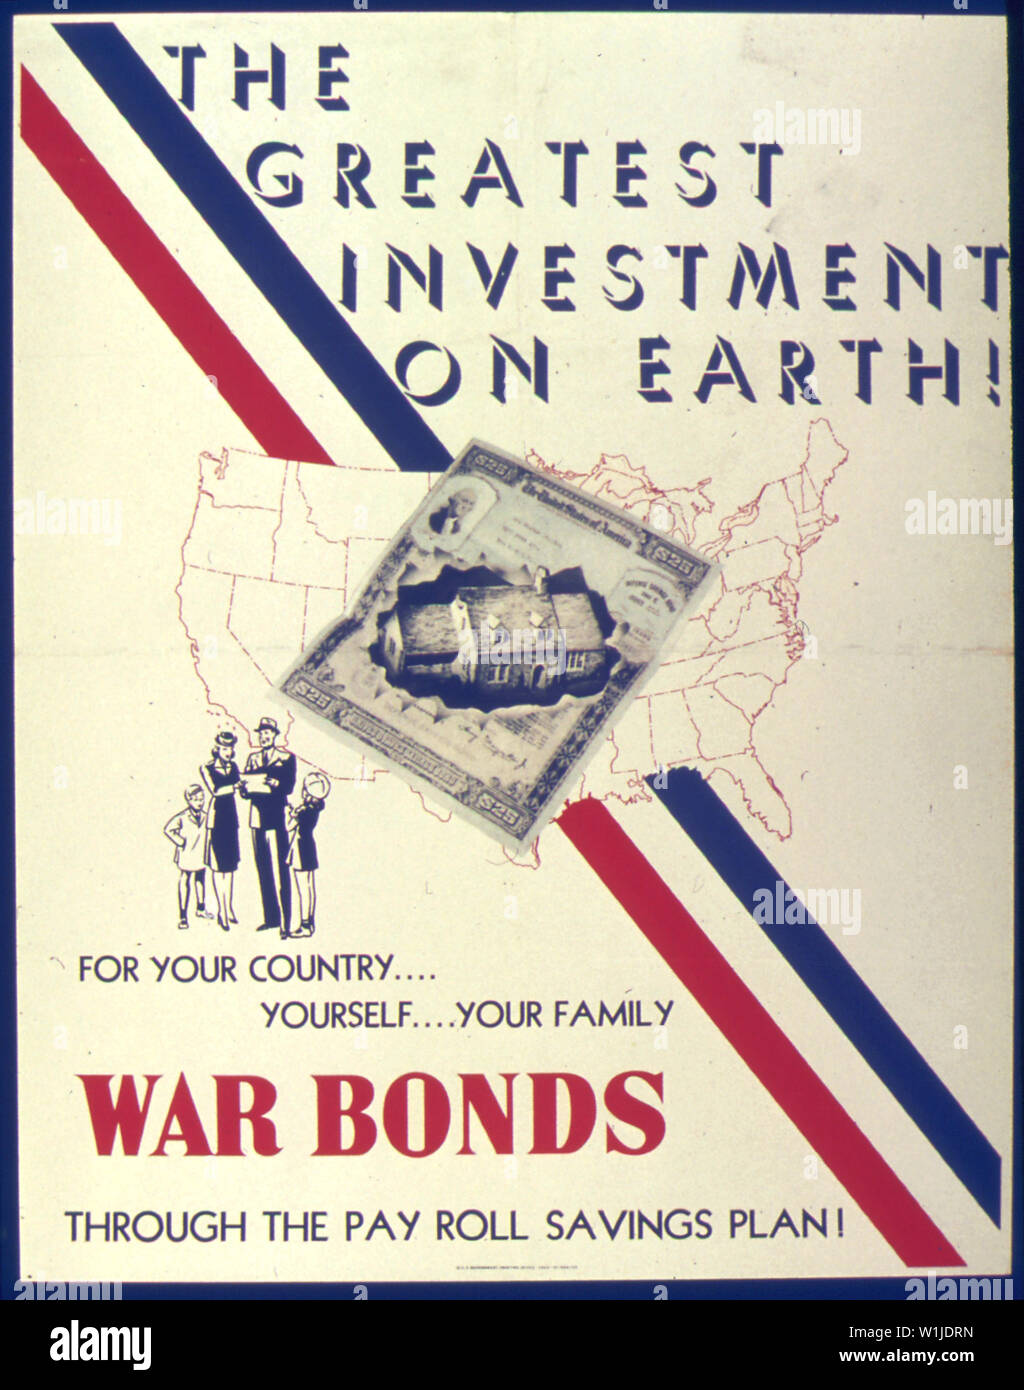 see below; The greatest investment on earth. For your country, yourself,  your family.; General notes: Drawing of a house on a war bond on a map of  the United States. Below that